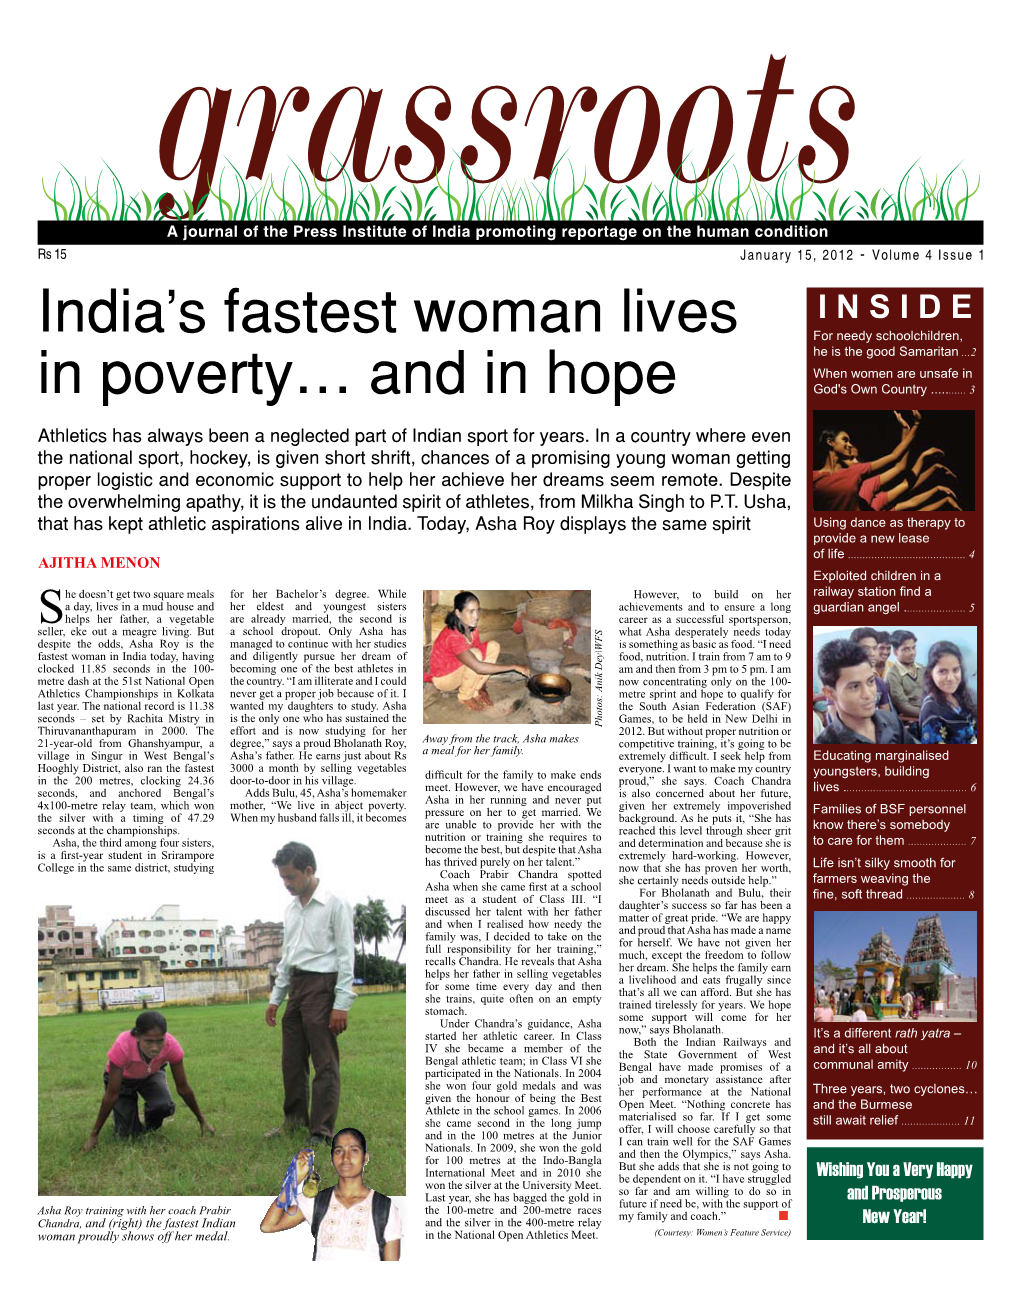 Grassroots a Journal of the Press Institute of India Promoting Reportage on the Human Condition Rs 15 January 15, 2012 - Volume 4 Issue 1